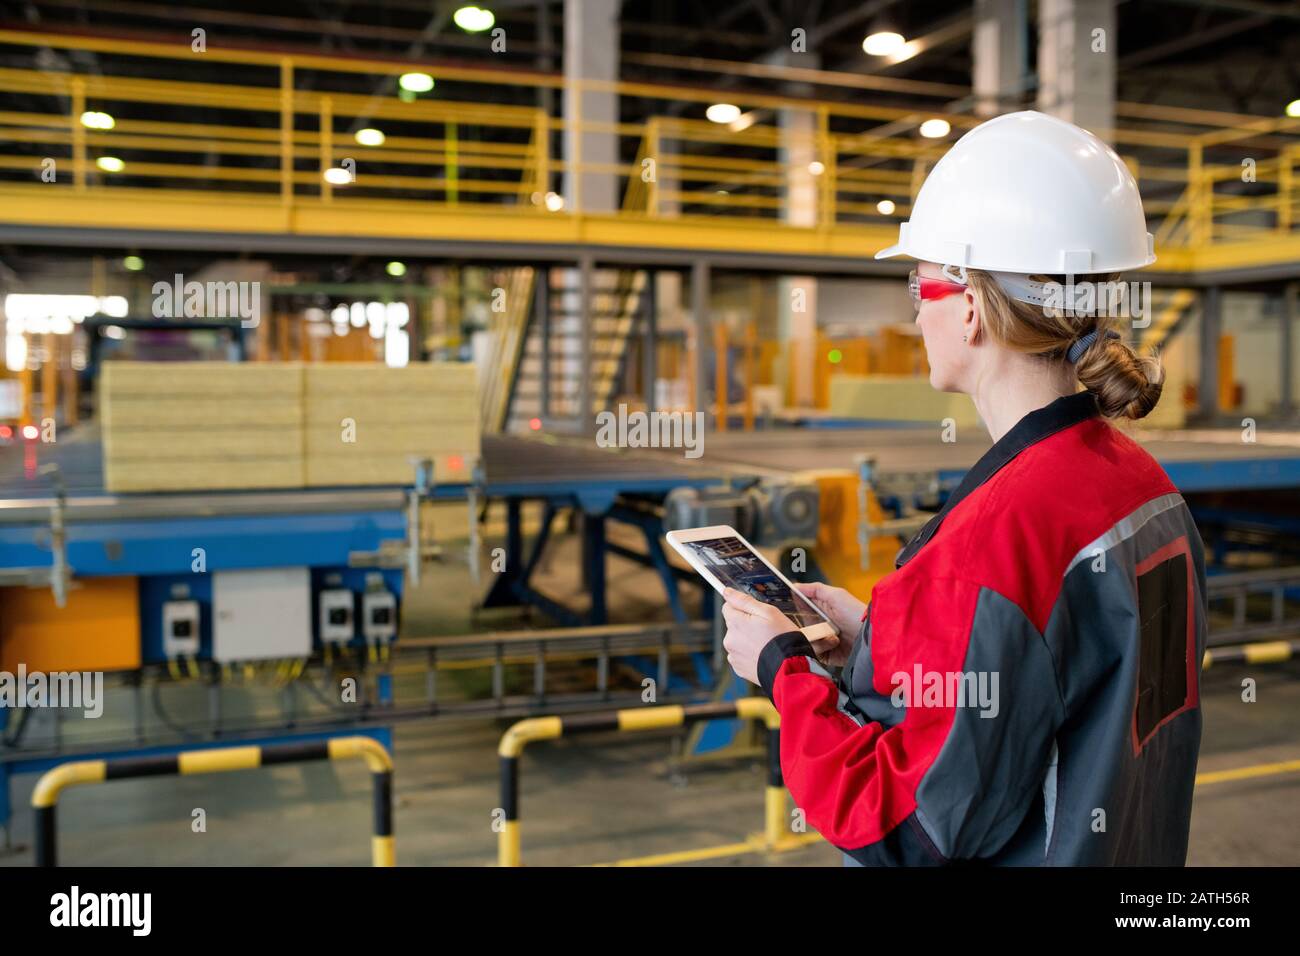 Rear view of busy woman in hardhat and safety goggles using tablet while controlling production line process at factory Stock Photo